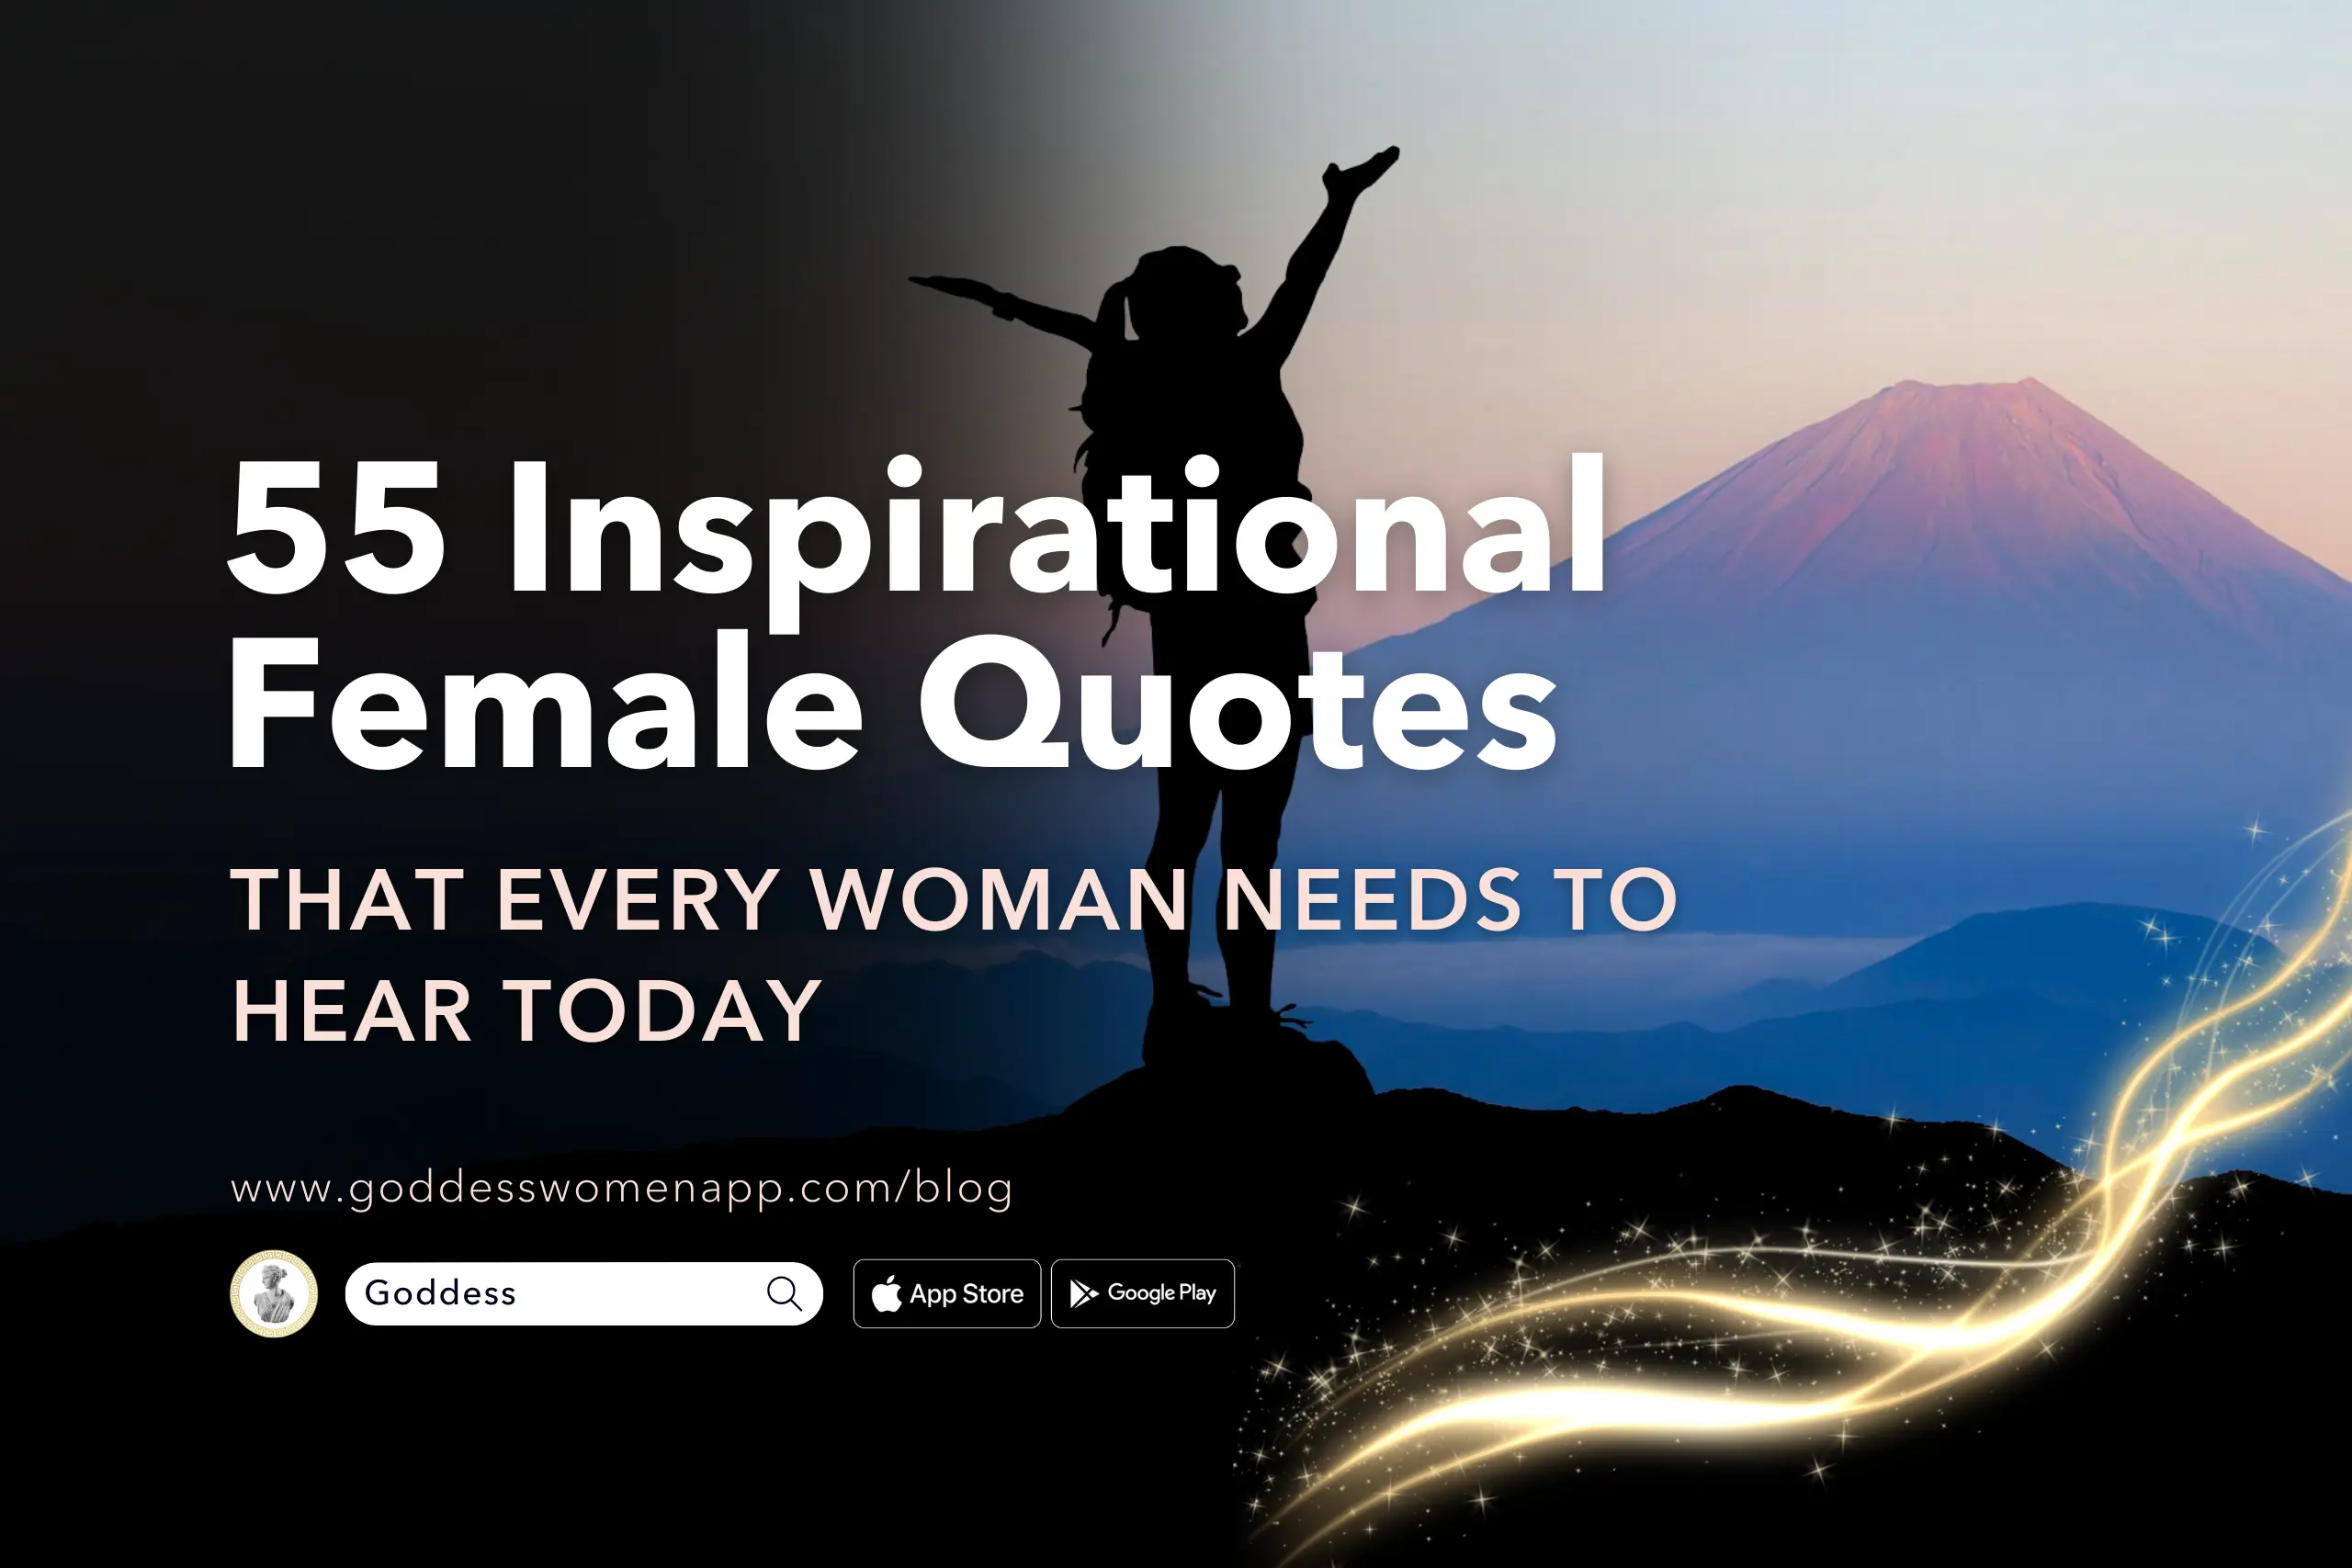 55 Inspirational Female Quotes That Every Woman Needs to Hear Today